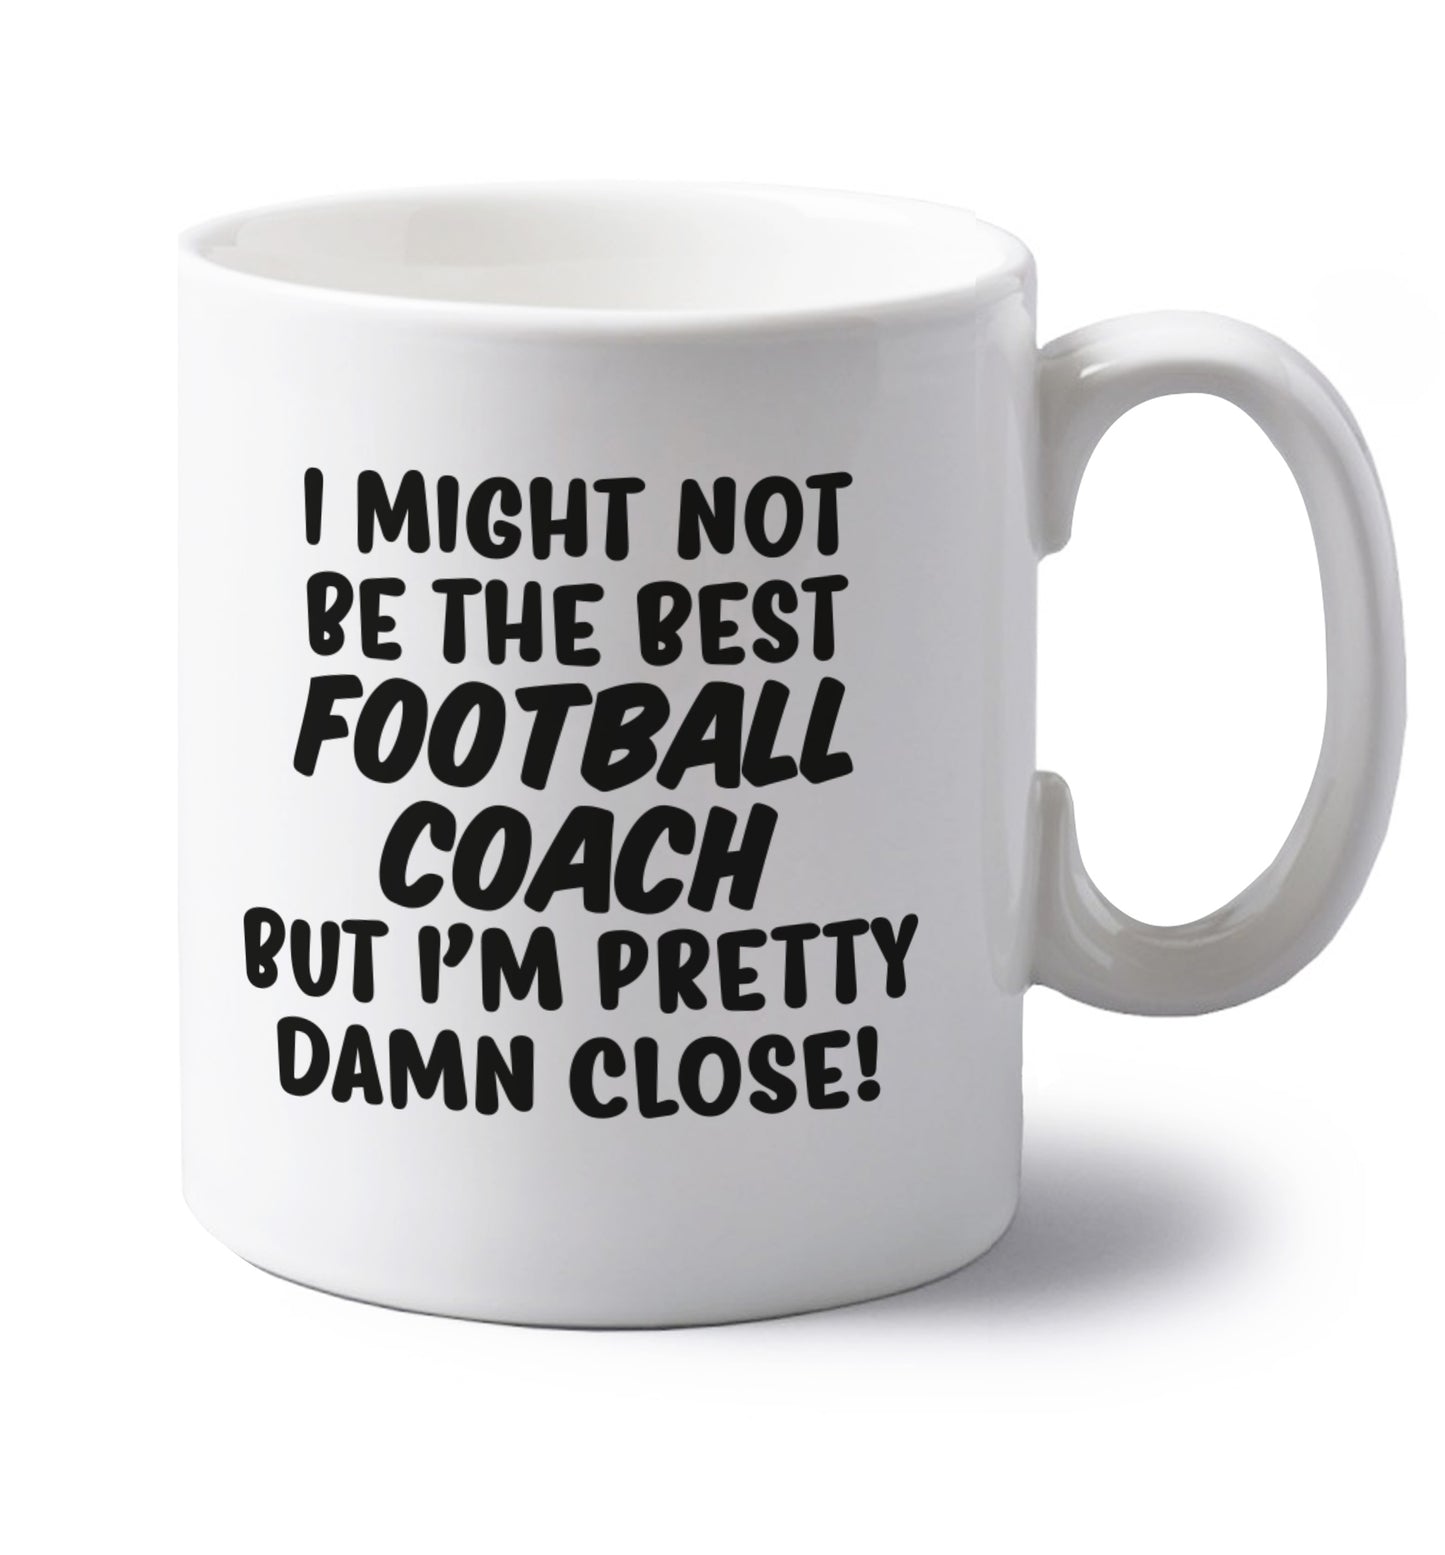 I might not be the best football coach but I'm pretty close! left handed white ceramic mug 